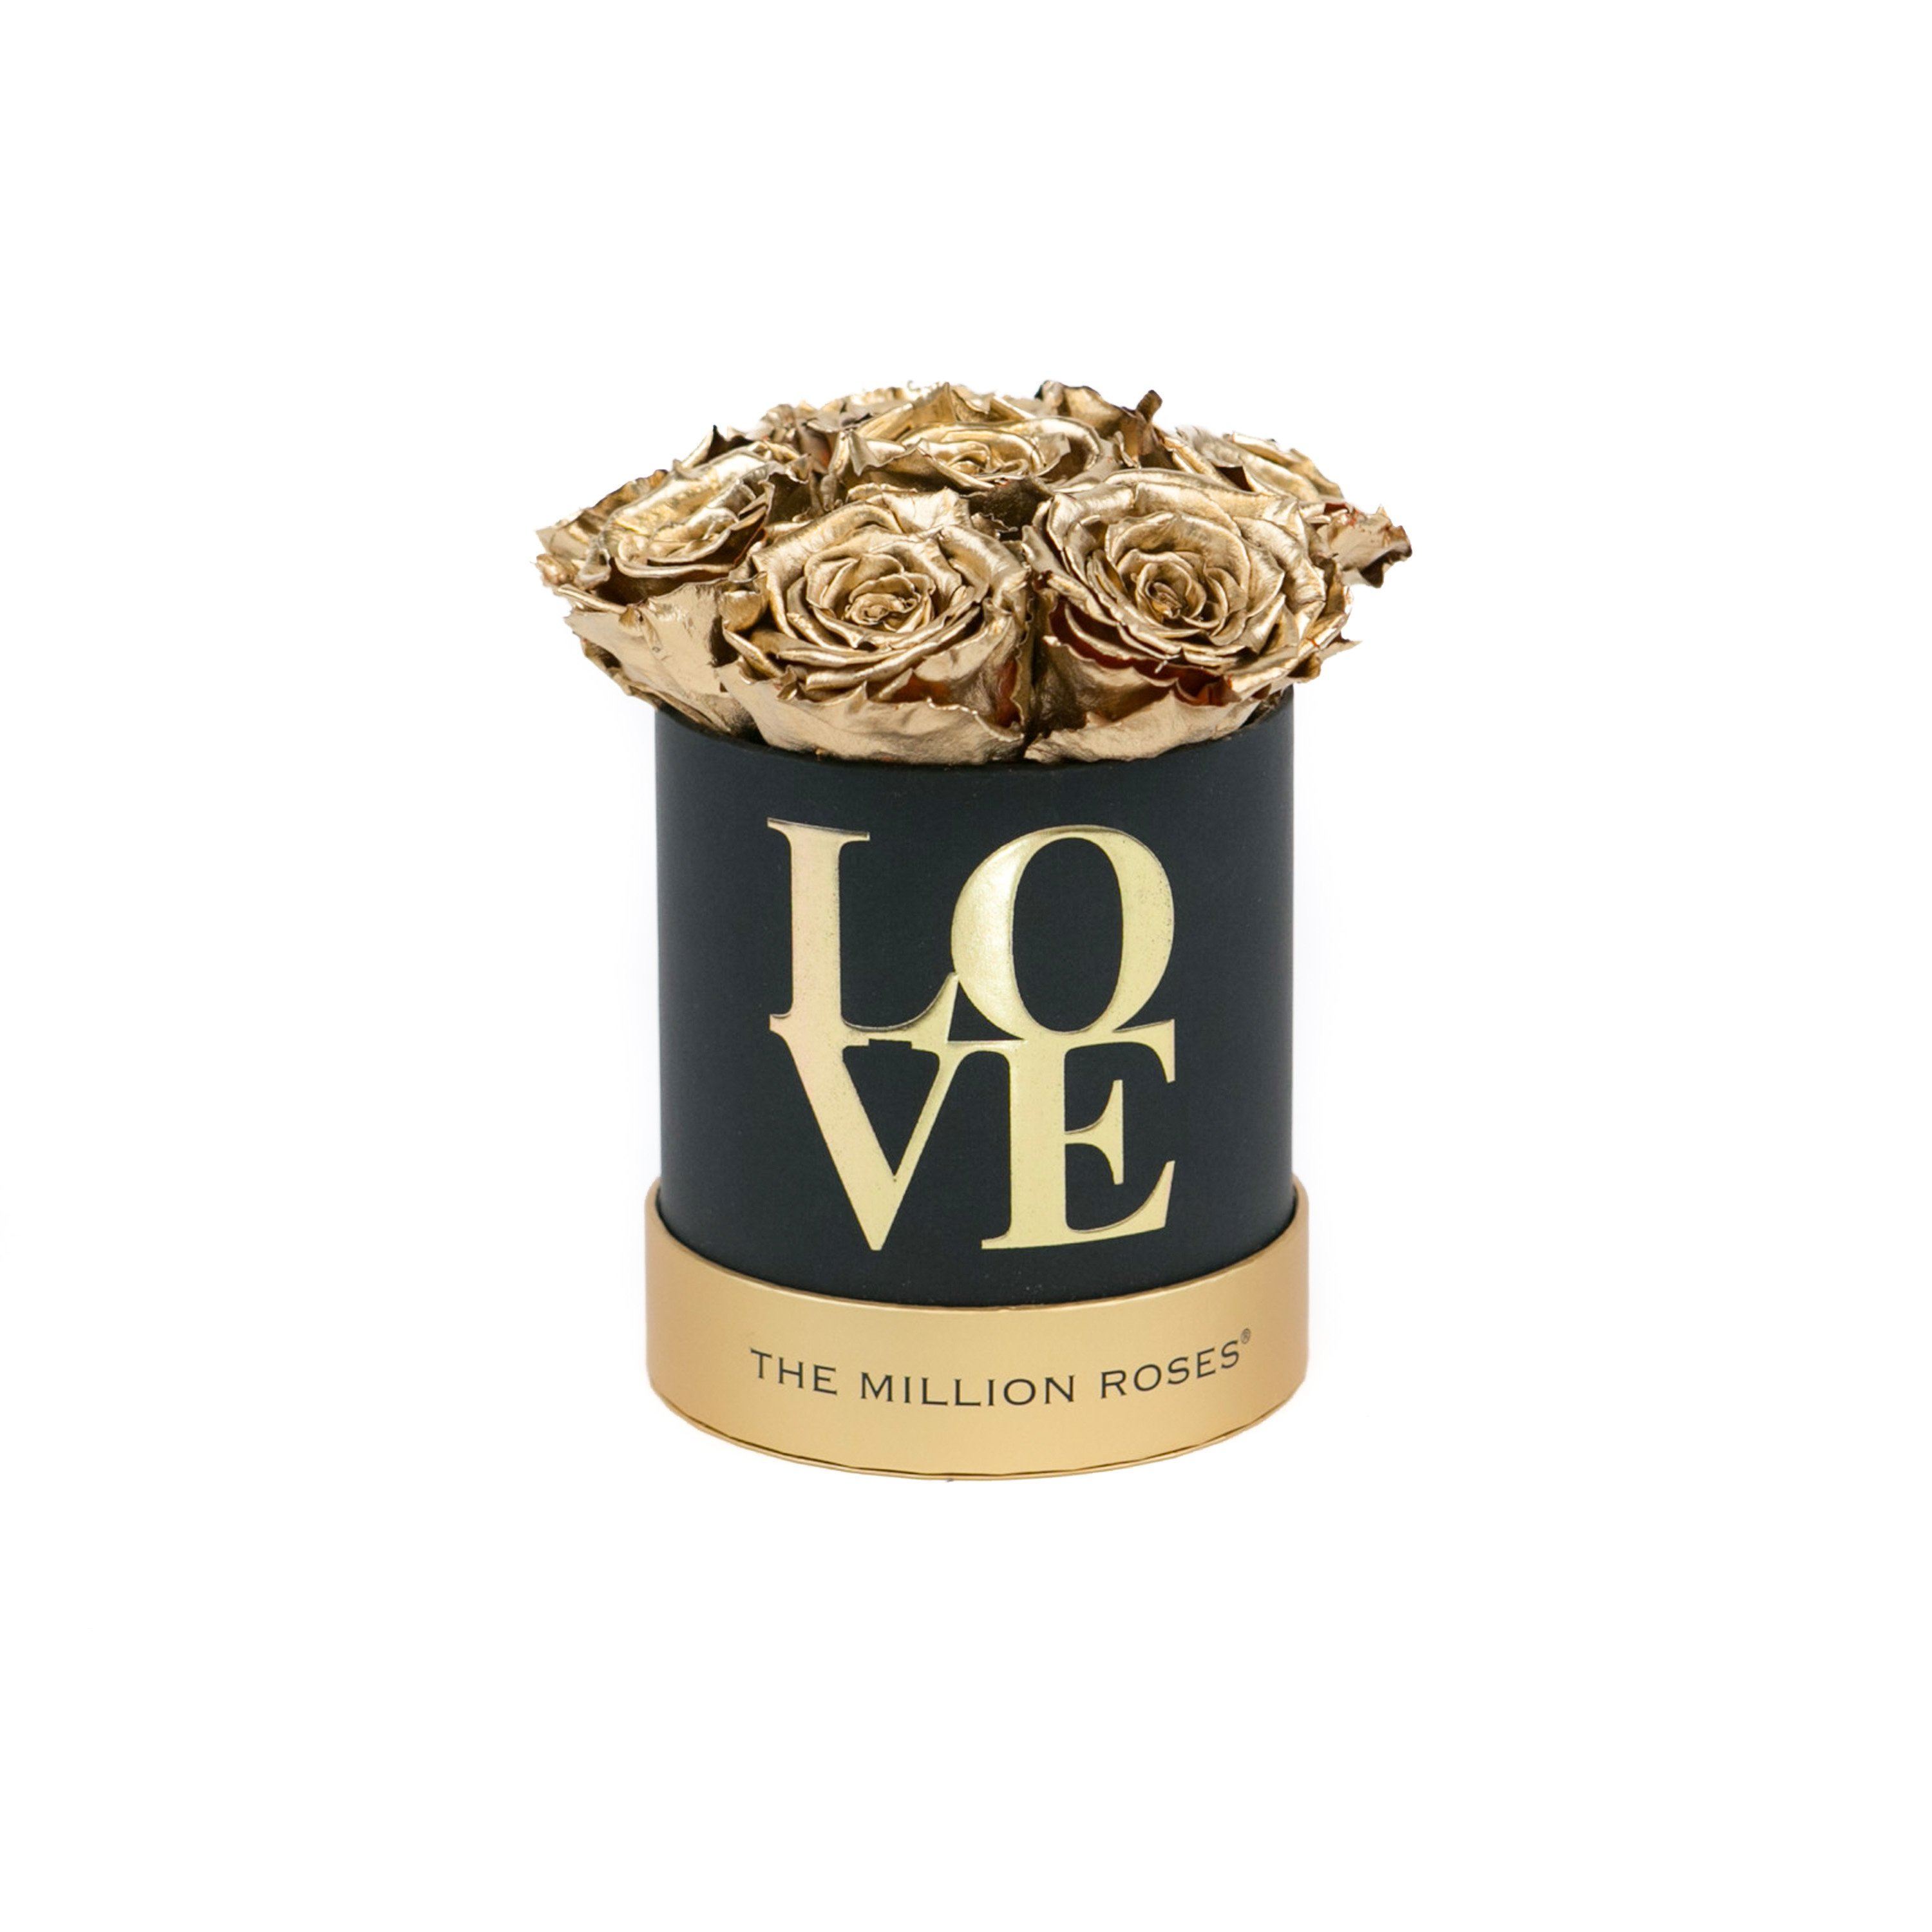 the million basic+ box - "Love Collection" limited edition "LOVE" - GOLD ROSES gold eternity roses - the million roses